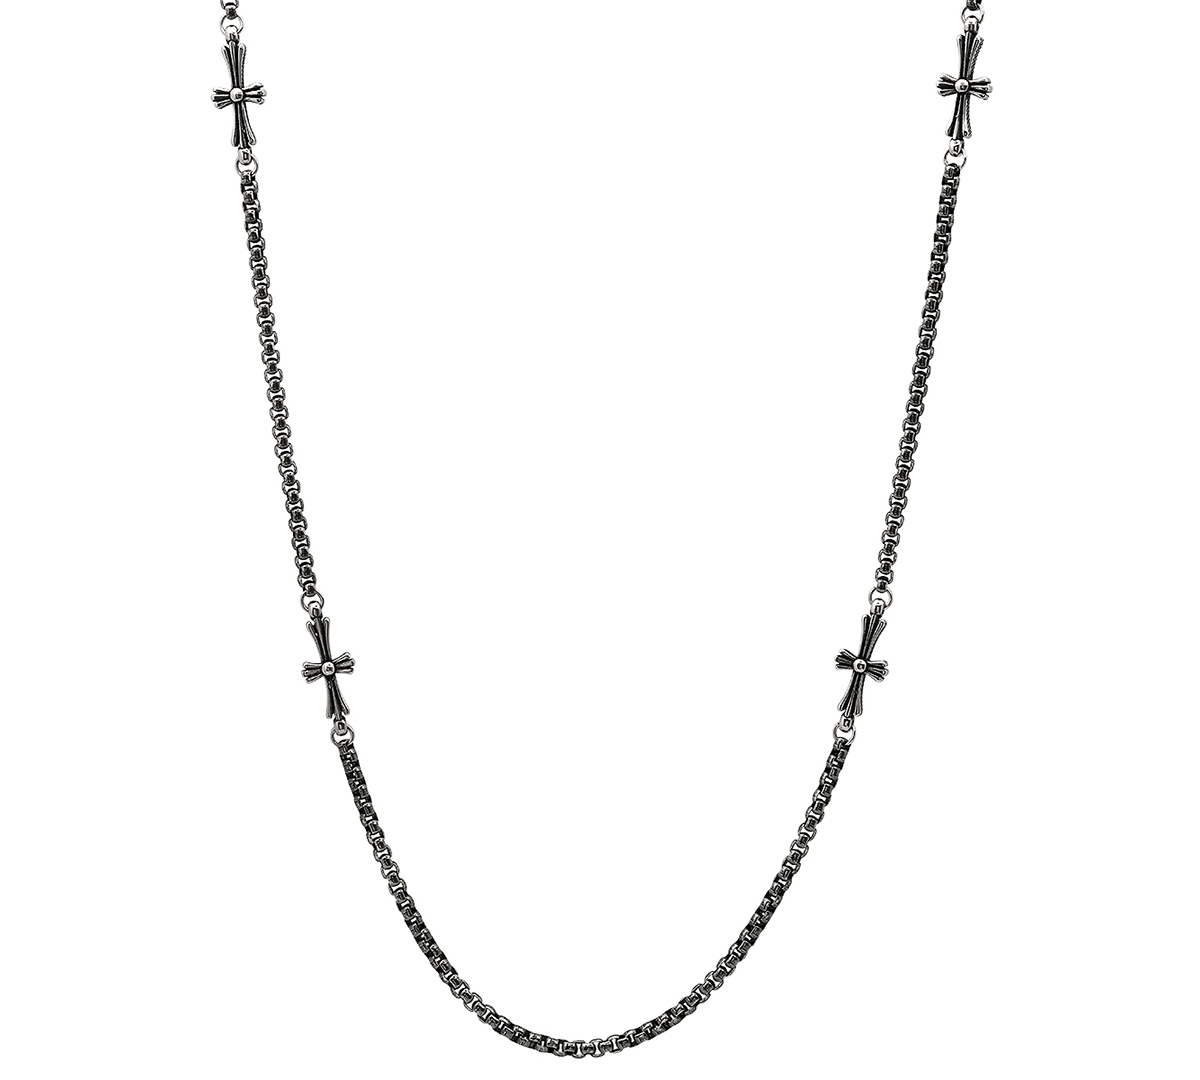 Steeltime Men's Stainless Steel Round Link Chain & Crosses Necklace, 24" In Gunmetal